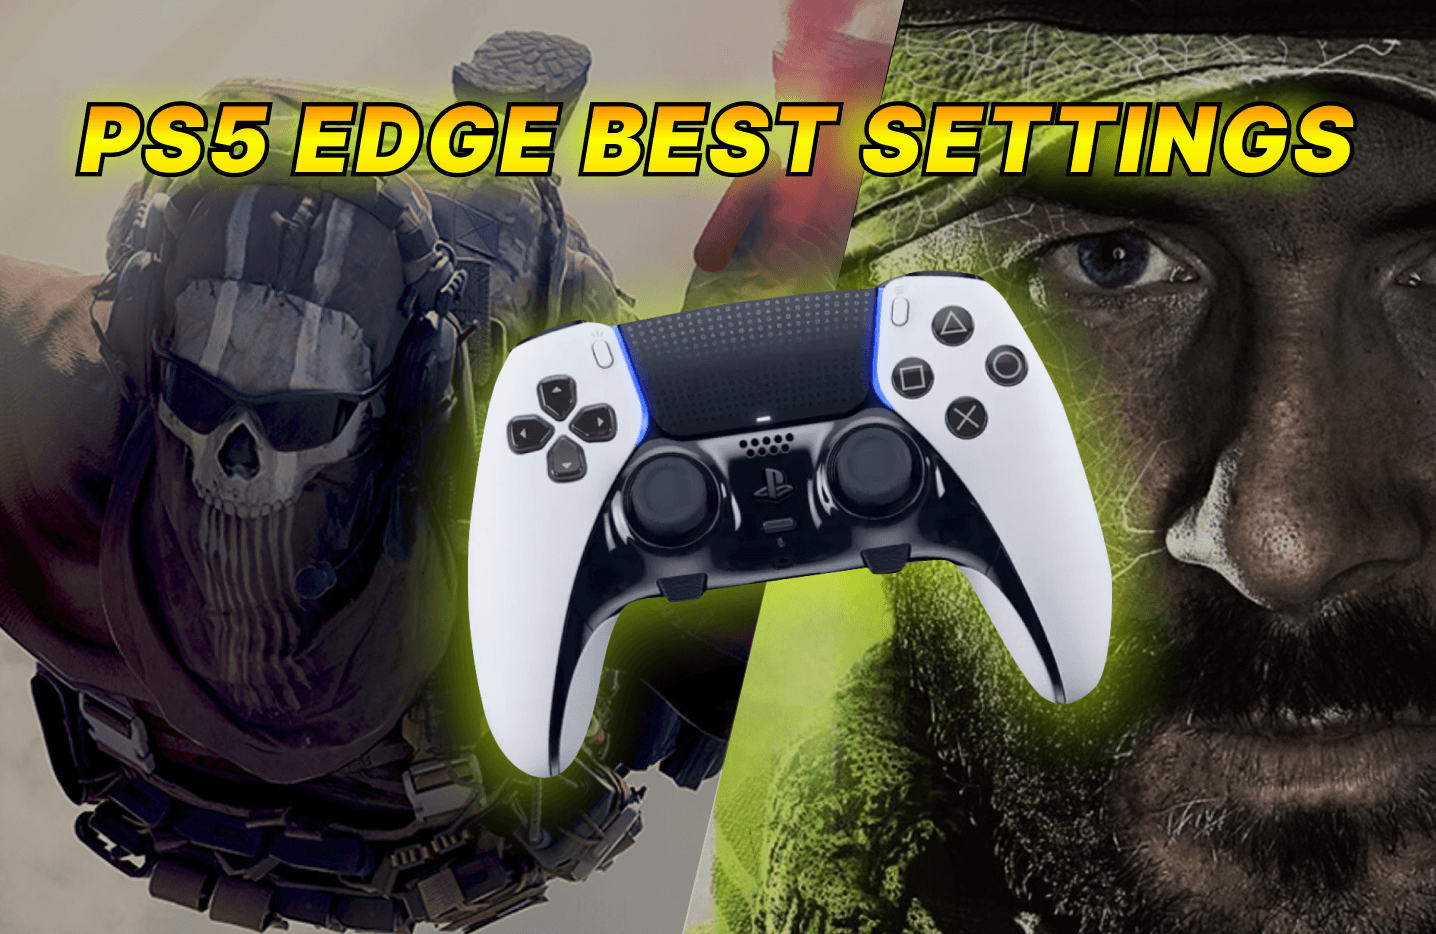 NEW* HOW TO AIMBOT 🎮 PS5/XBOX Controller! (Best Settings + Aim Tips) -  Vanguard Season 4 